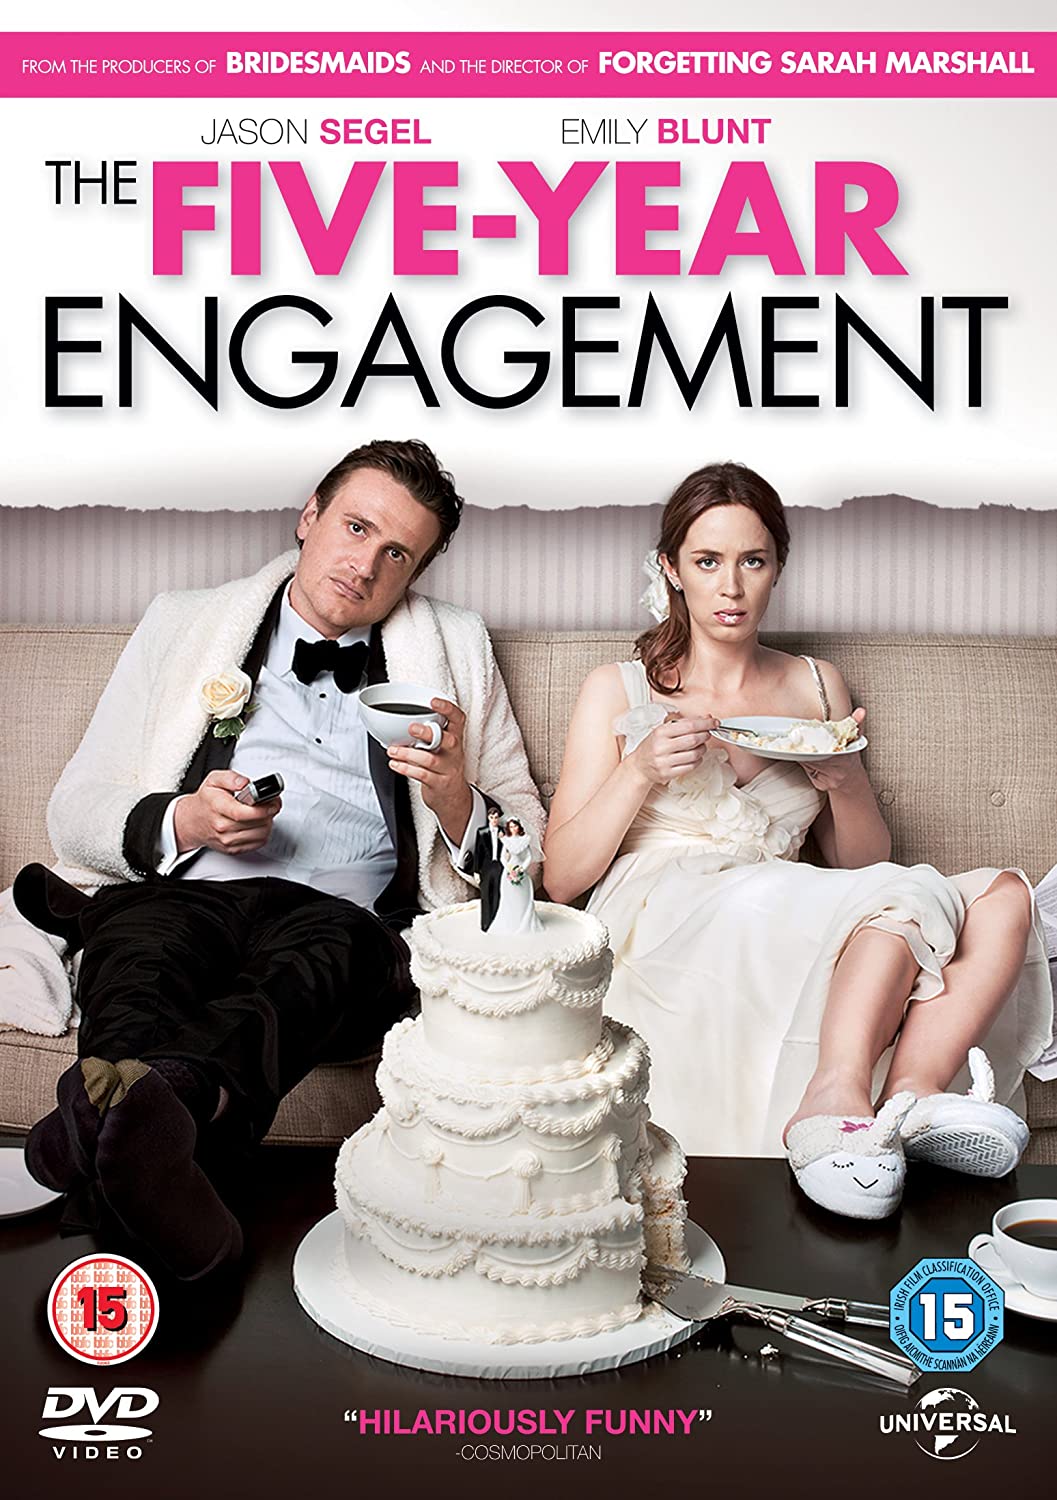 The Five-Year Engagement [2012] - Romance/Comedy [DVD]